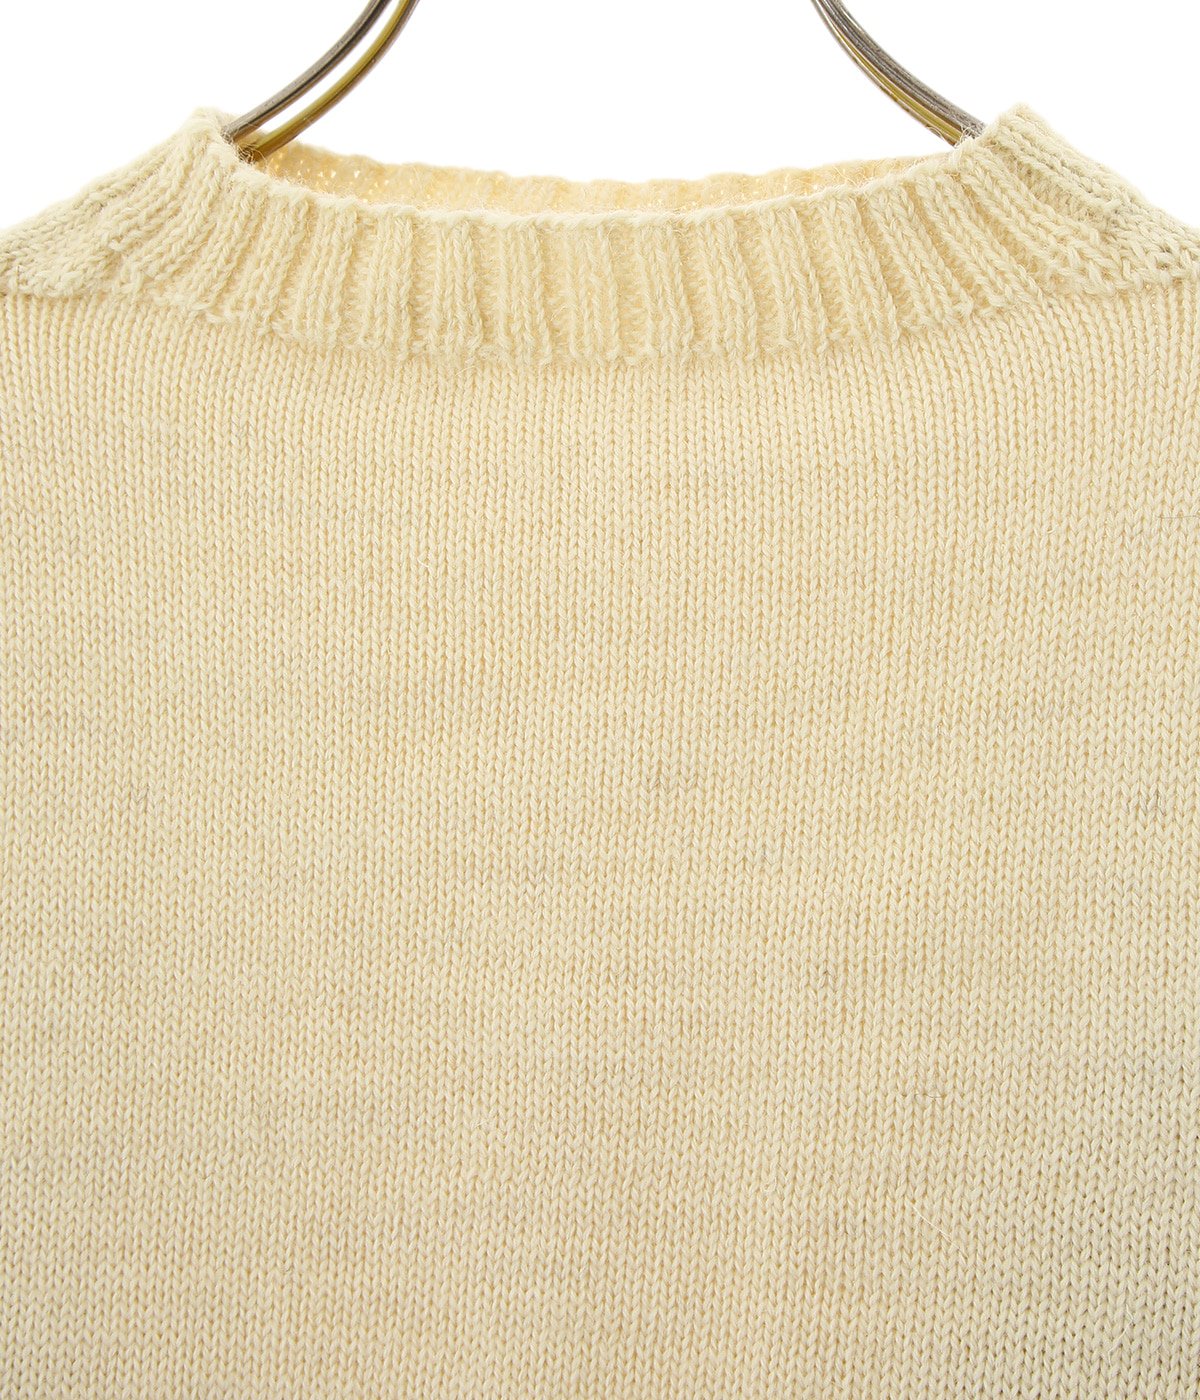 TRADITIONAL GUERNSEY SWEATER